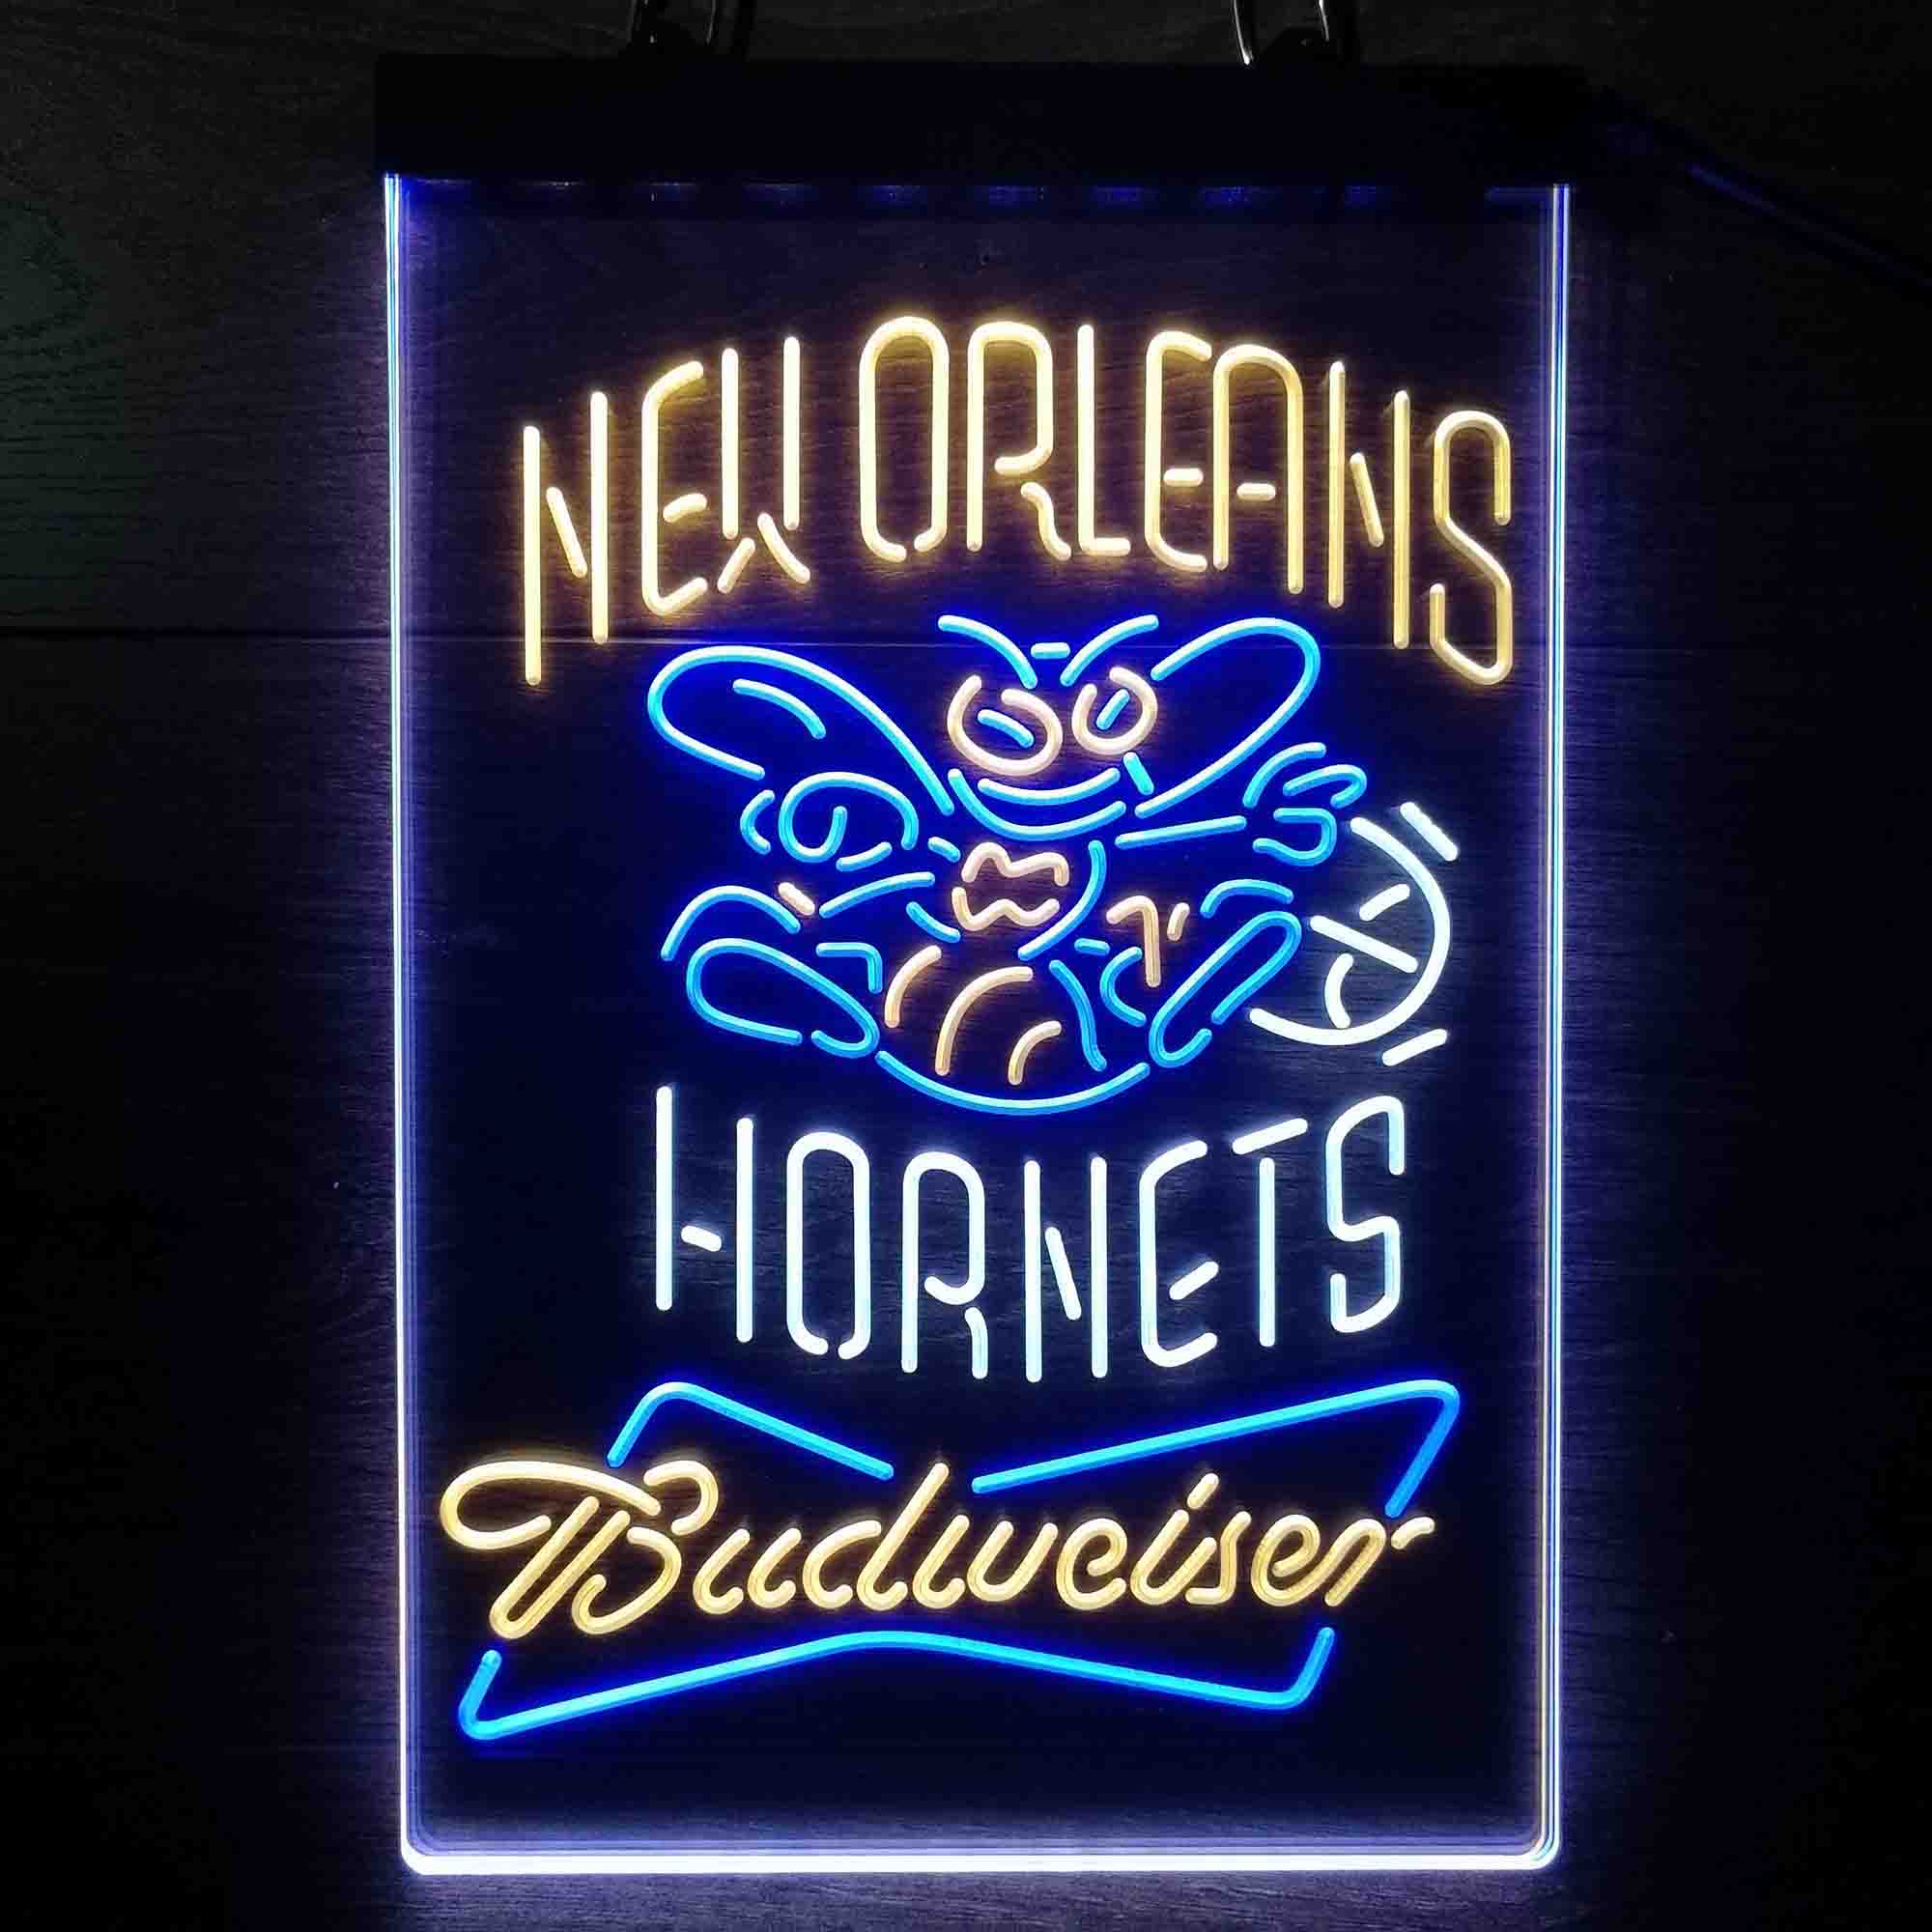 New Orleans Hornets Nba Budweiser Neon LED Sign 3 Colors